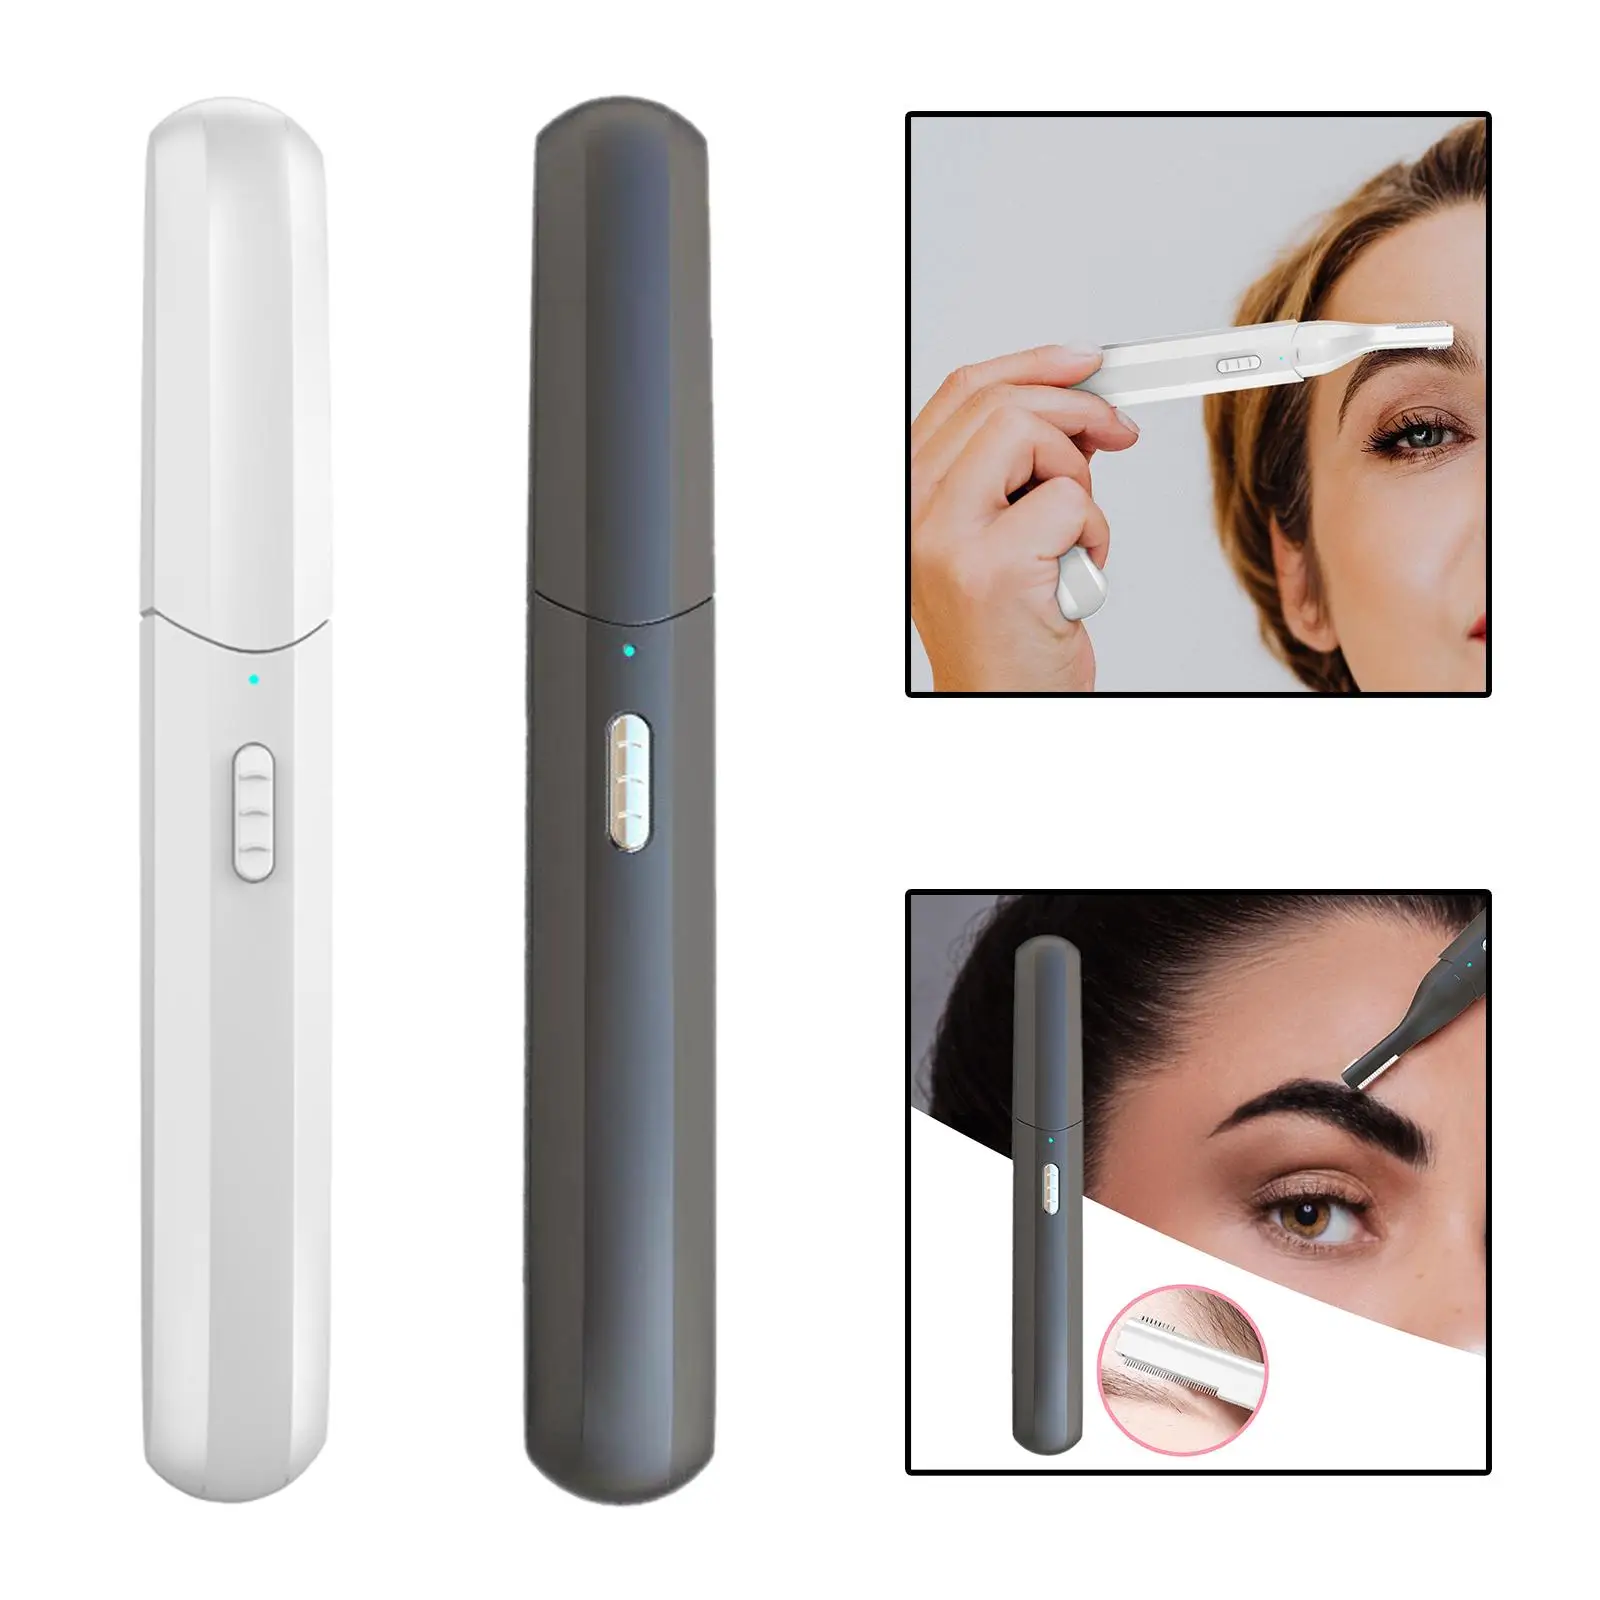 USB Charging Electric Eyebrow trimming Hair Removal Tool Portable for Armpit